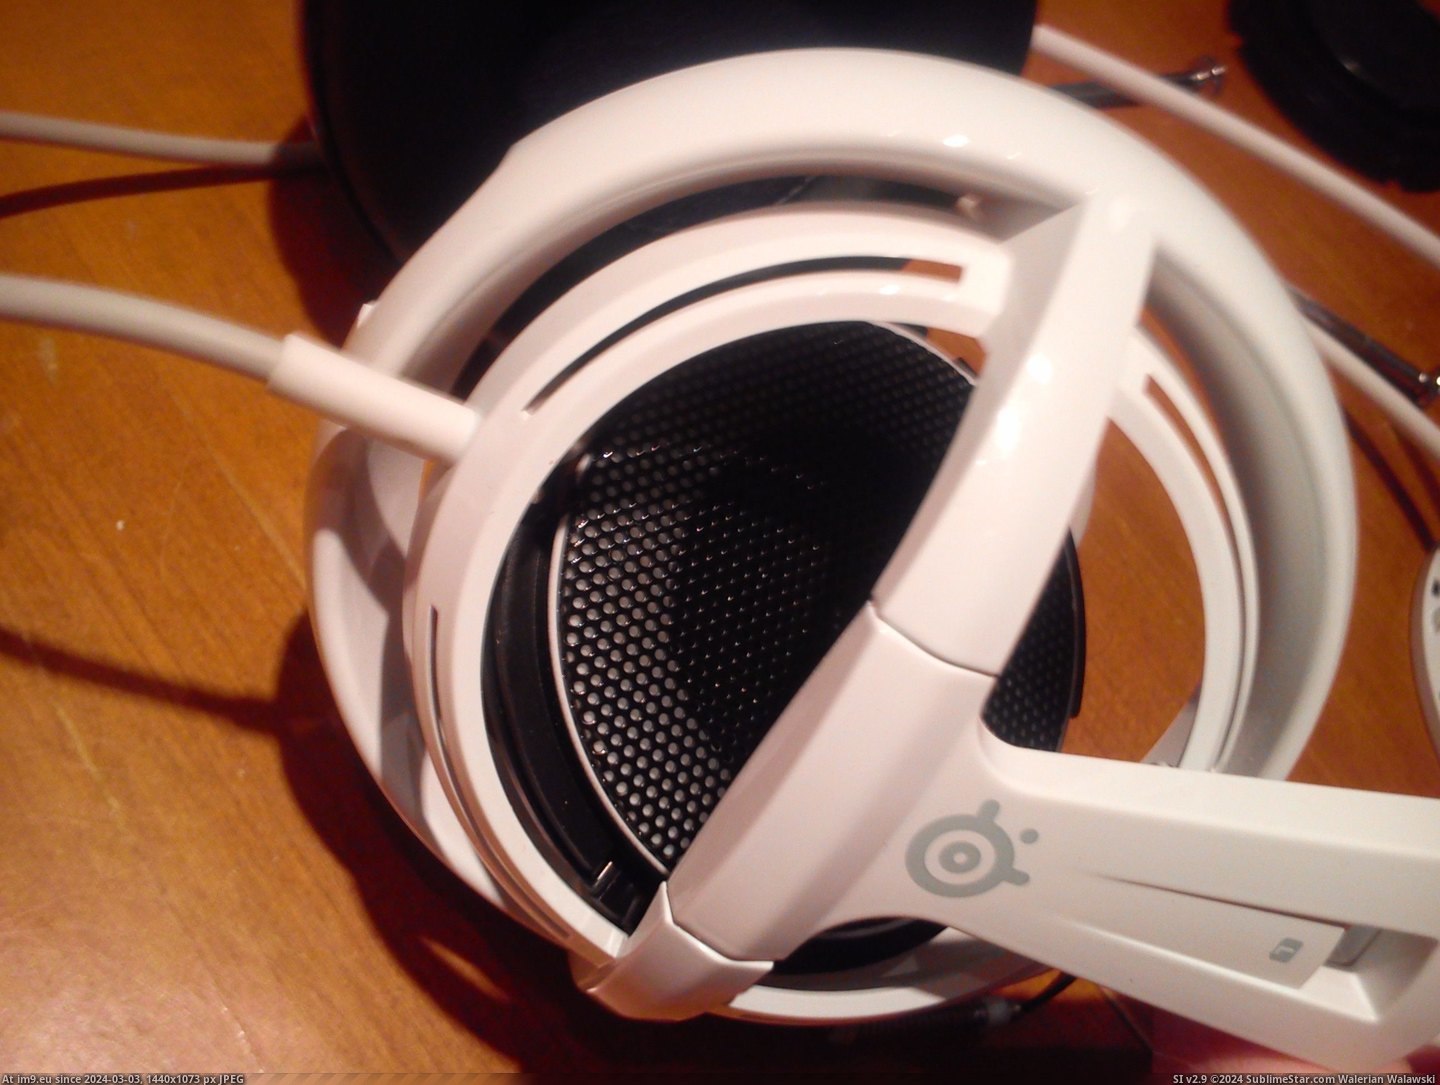 #Gaming #Headset #Modified [Gaming] I modified my headset. 4 Pic. (Image of album My r/GAMING favs))